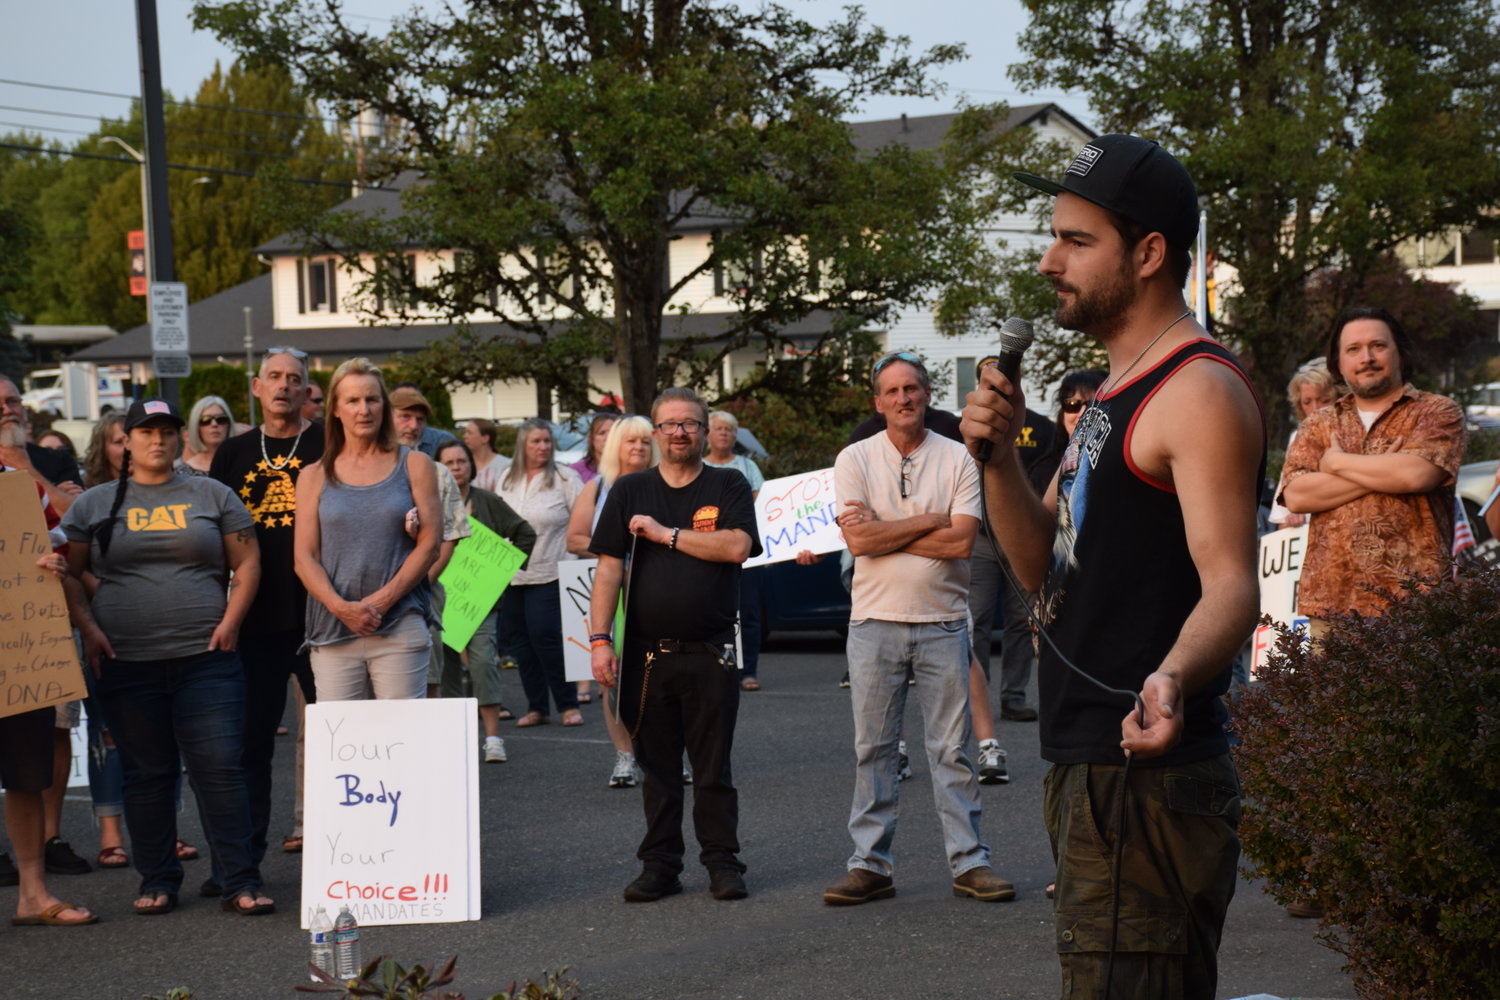 Battle Ground City Council candidate Josh VanGelder speaks to a crowd gathered in front of city hall on Sept. 7 to support a “medical freedom” ordinance under consideration by the council.